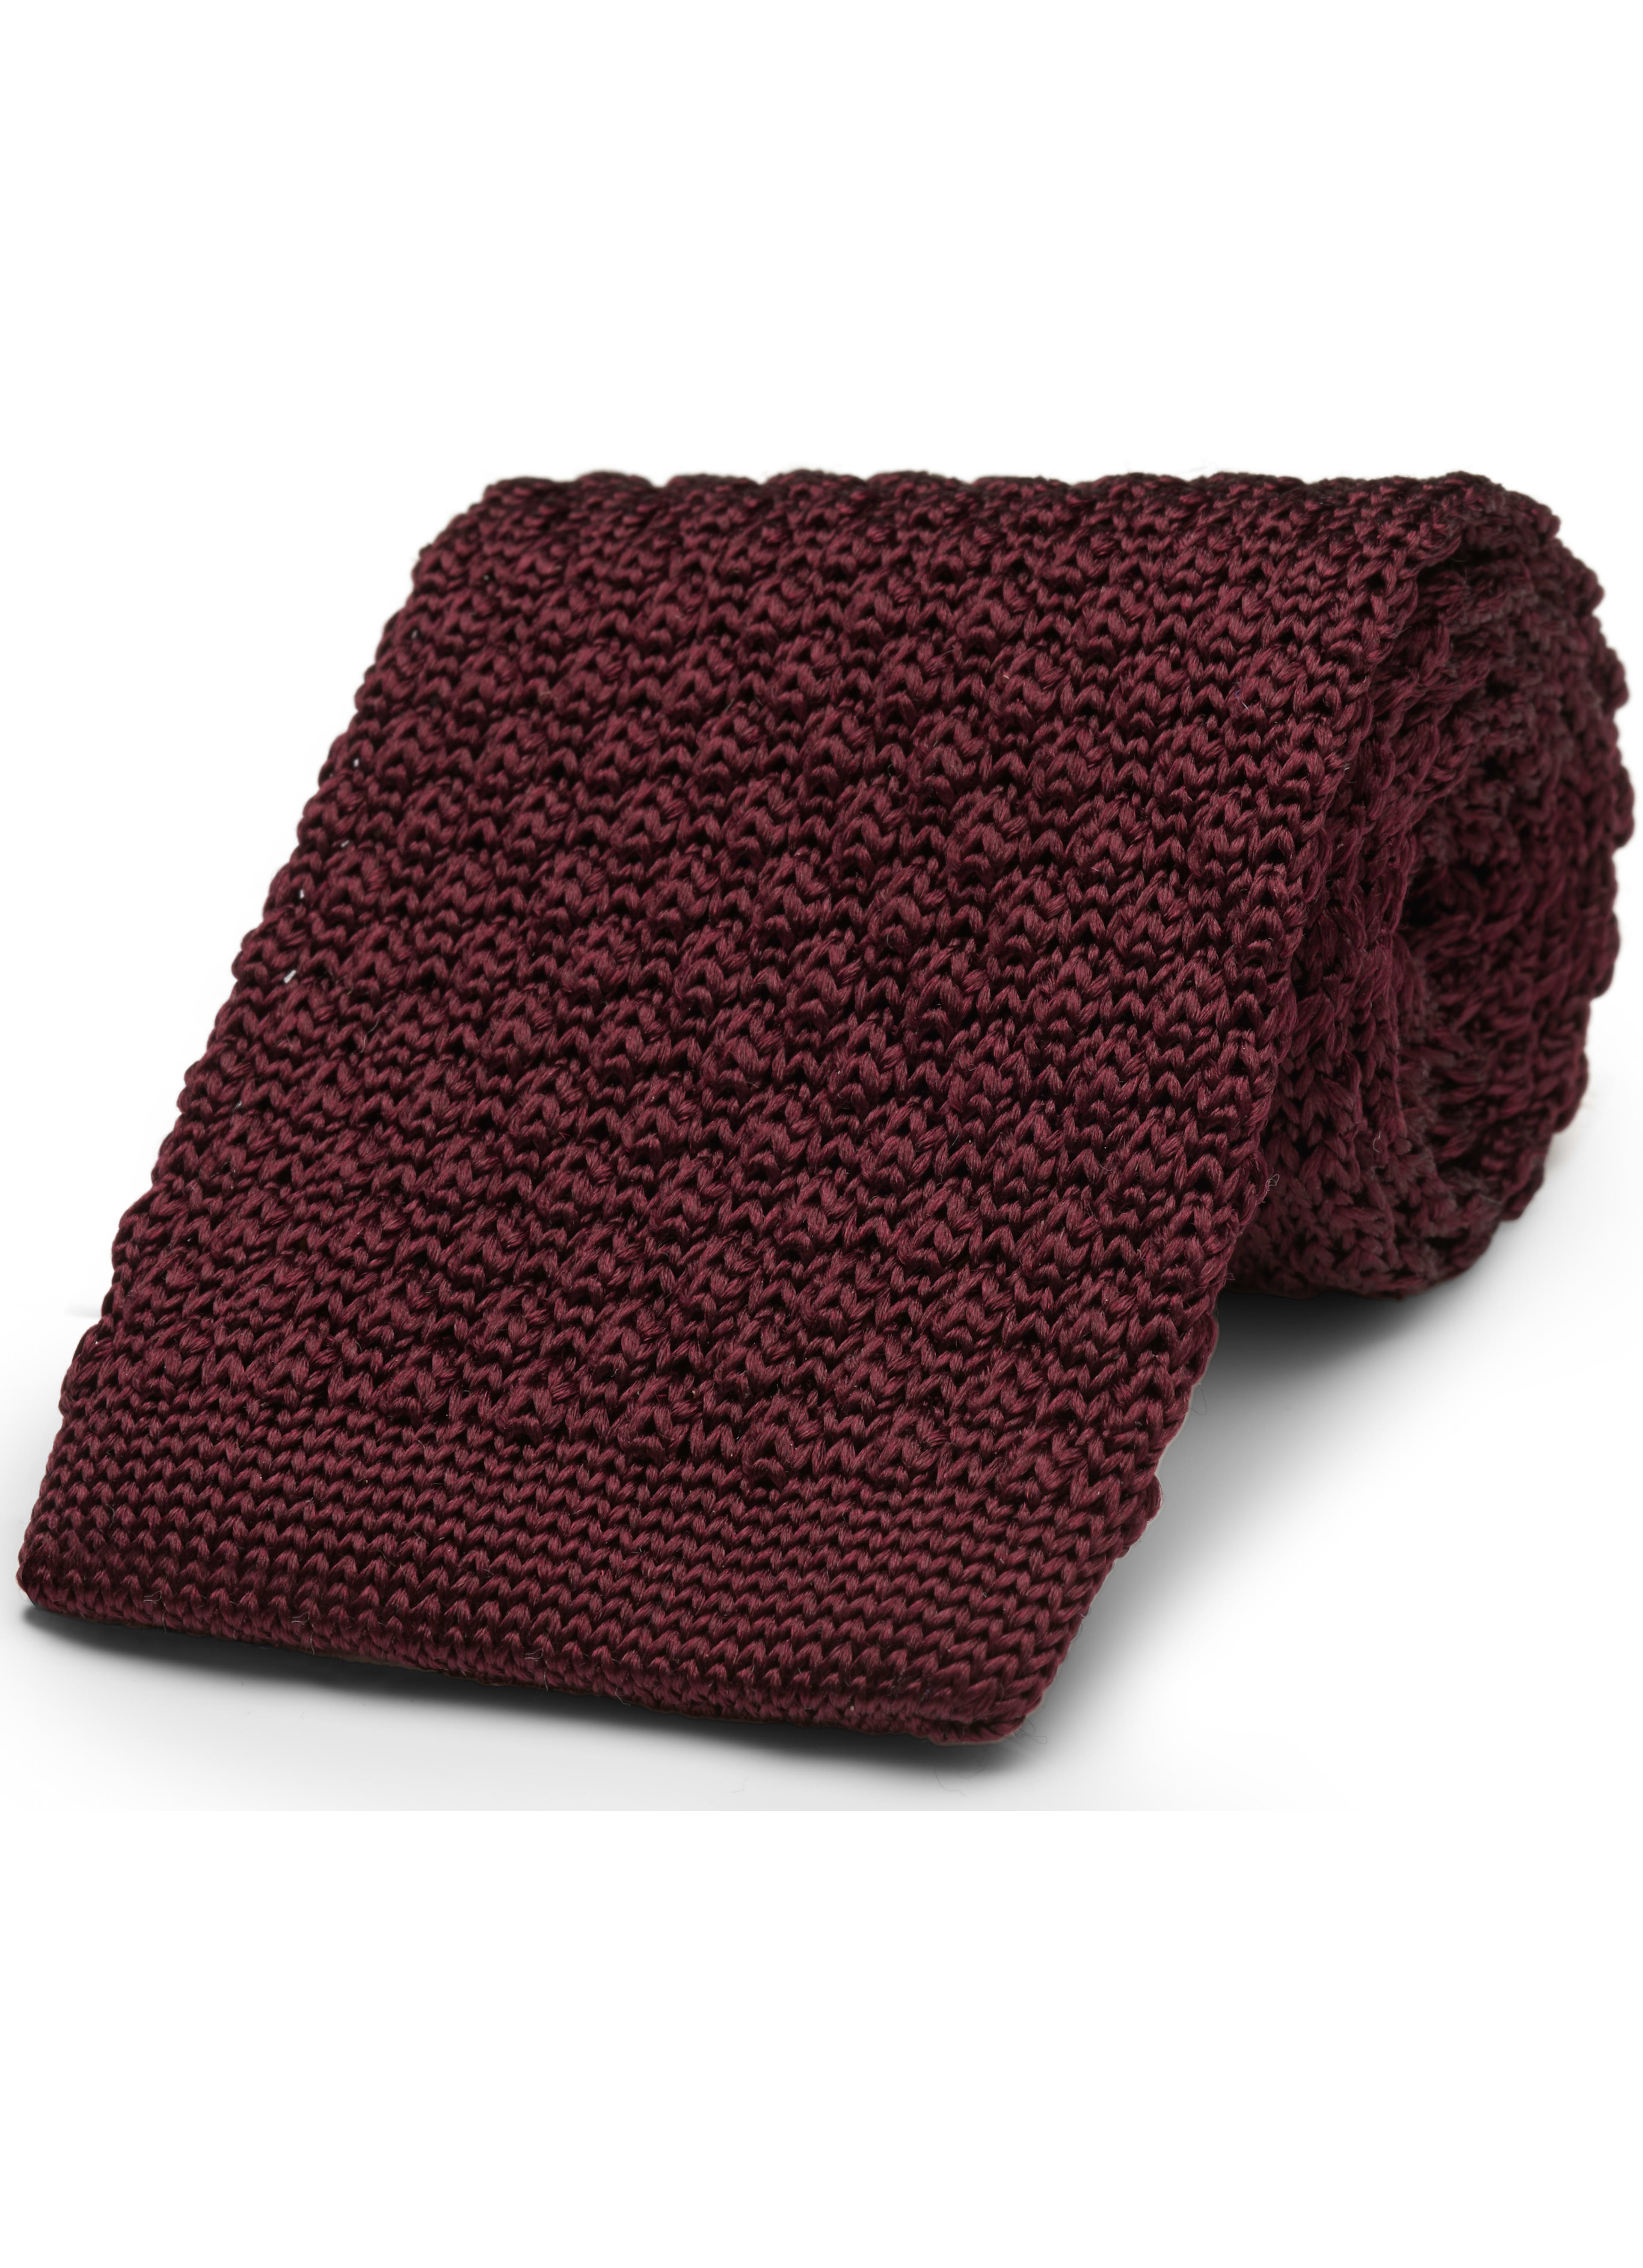 Burgundy Knitted Tie D161105 | Suitsupply Online Store